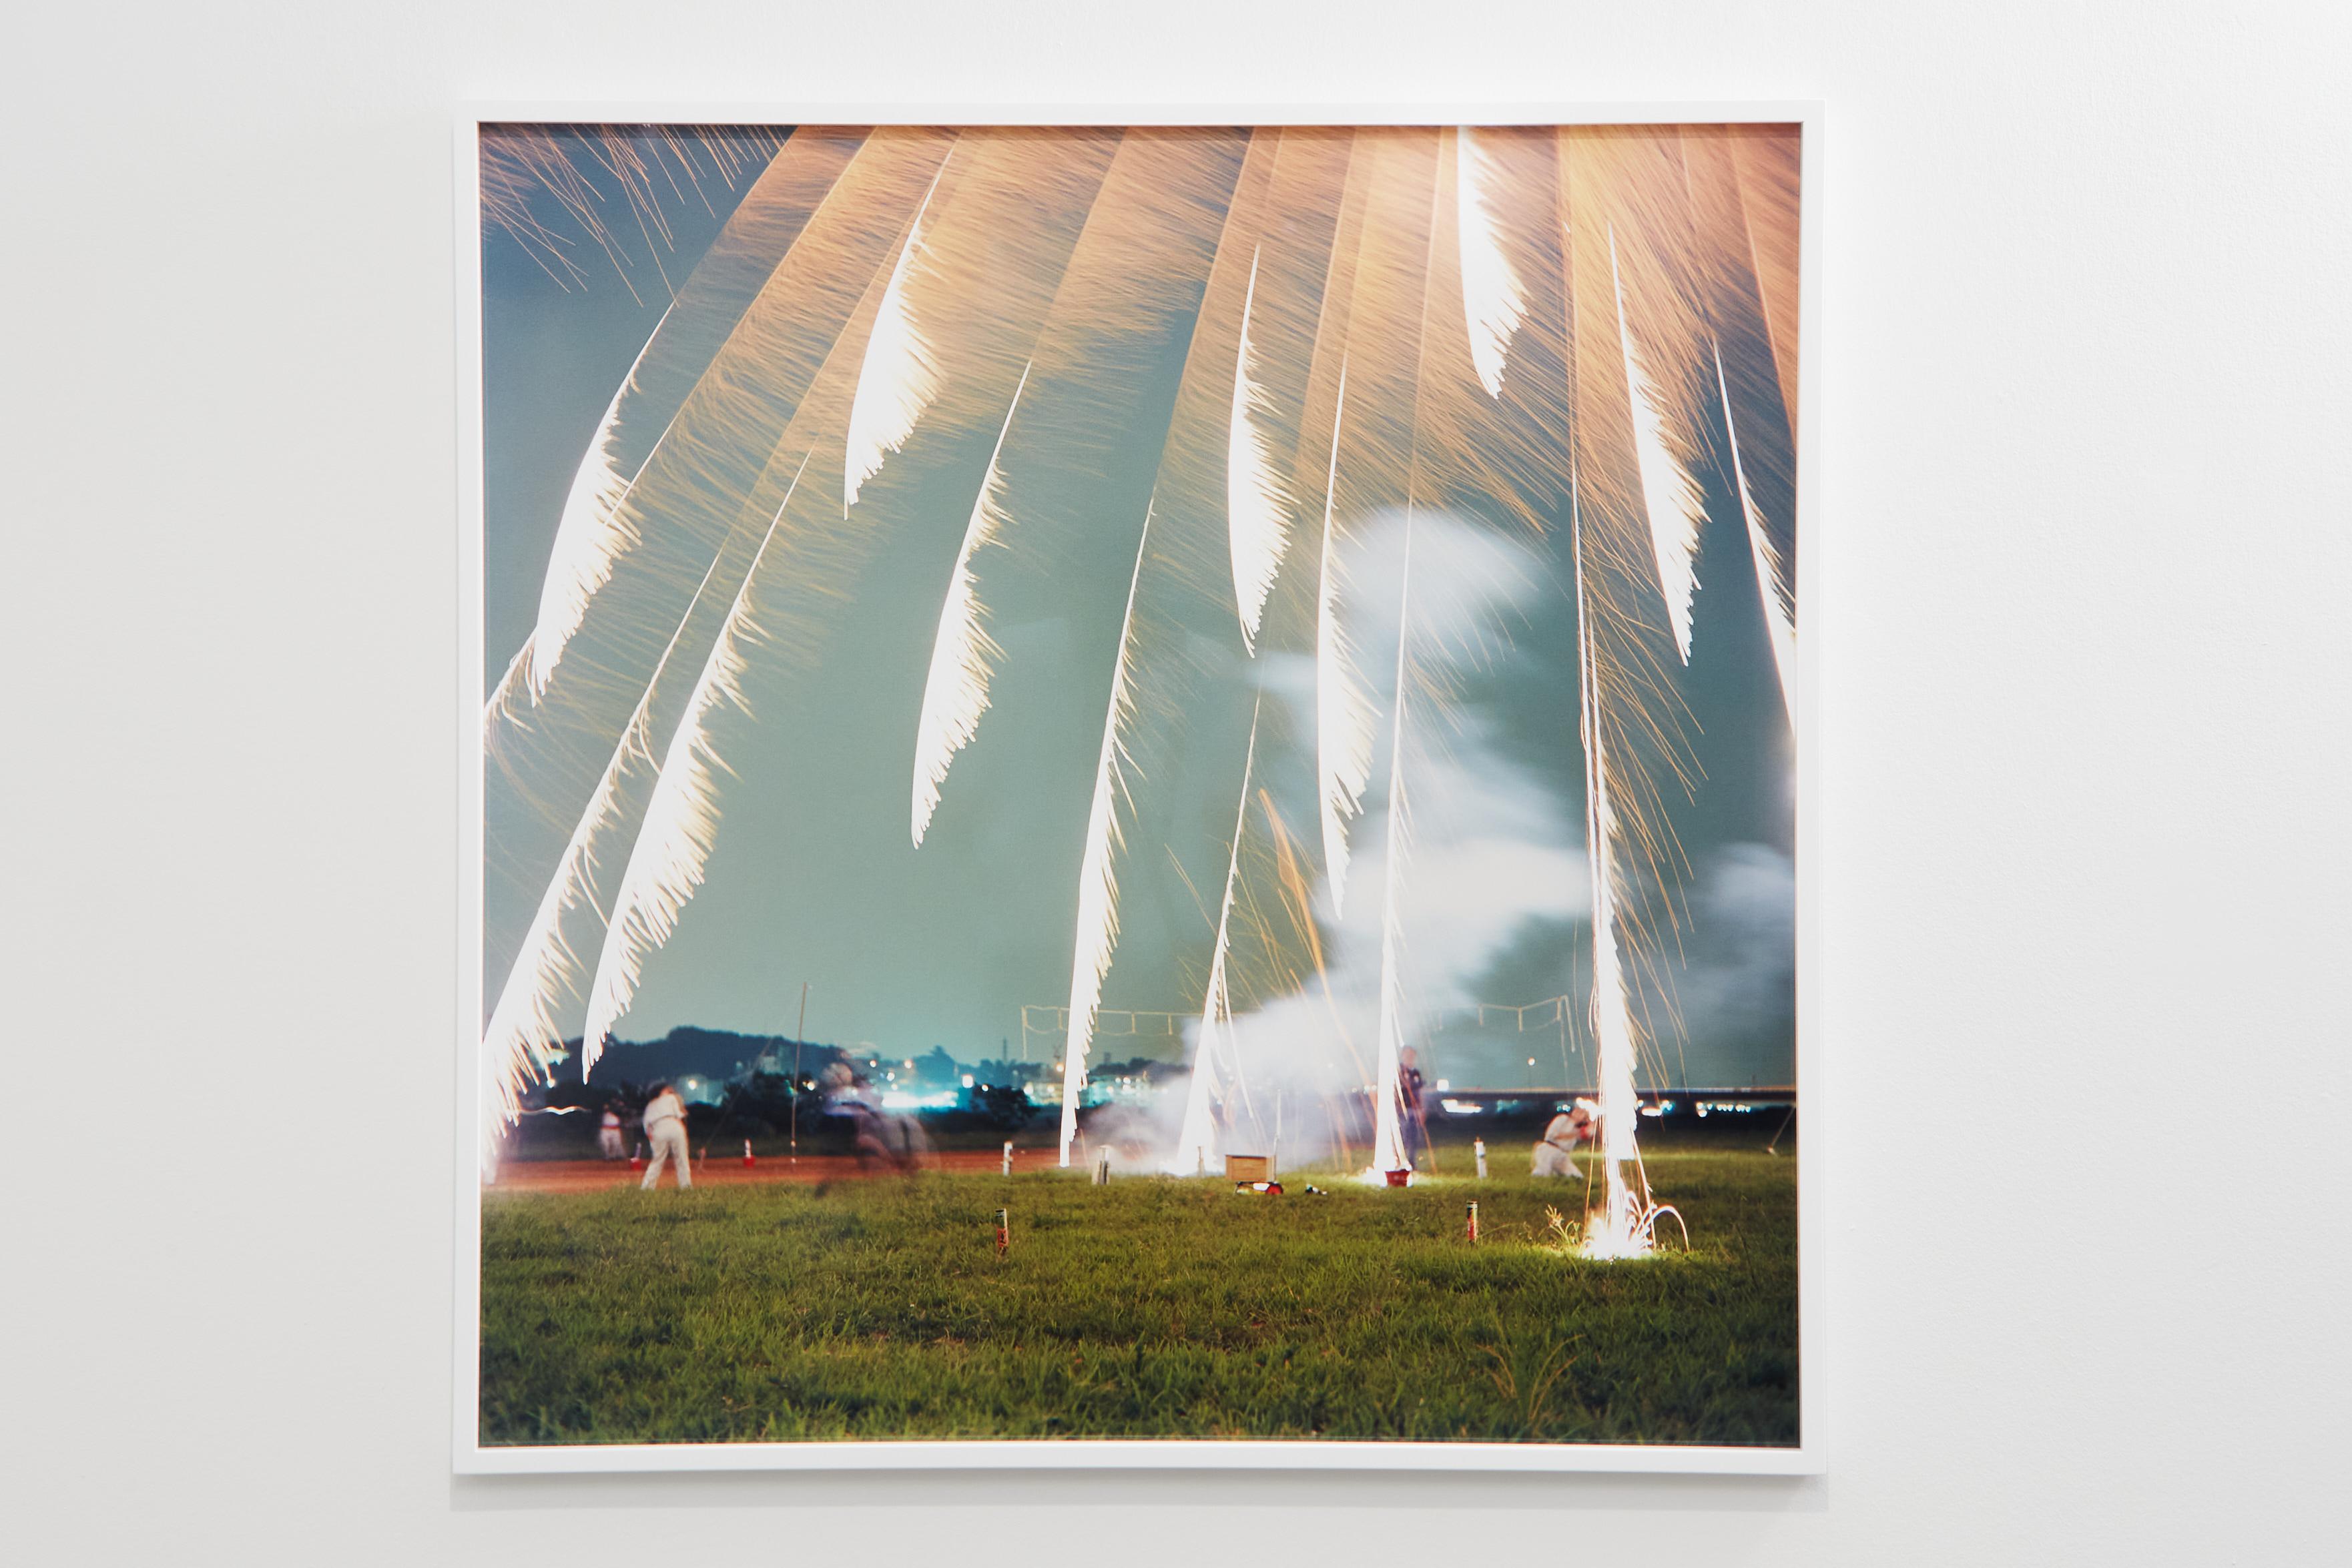 RINKO KAWAUCHI (*1972, Japan)
Untitled, from the series 'Hanabi'
2001
C–type print
Sheet 101.6 x 101.6 cm (40 x 40 in.)
Edition of 6; Ed. no. 2/6 
print only

Reminiscent of Japanese photography of the 1960s Rinko Kawauchi’s work is the search for